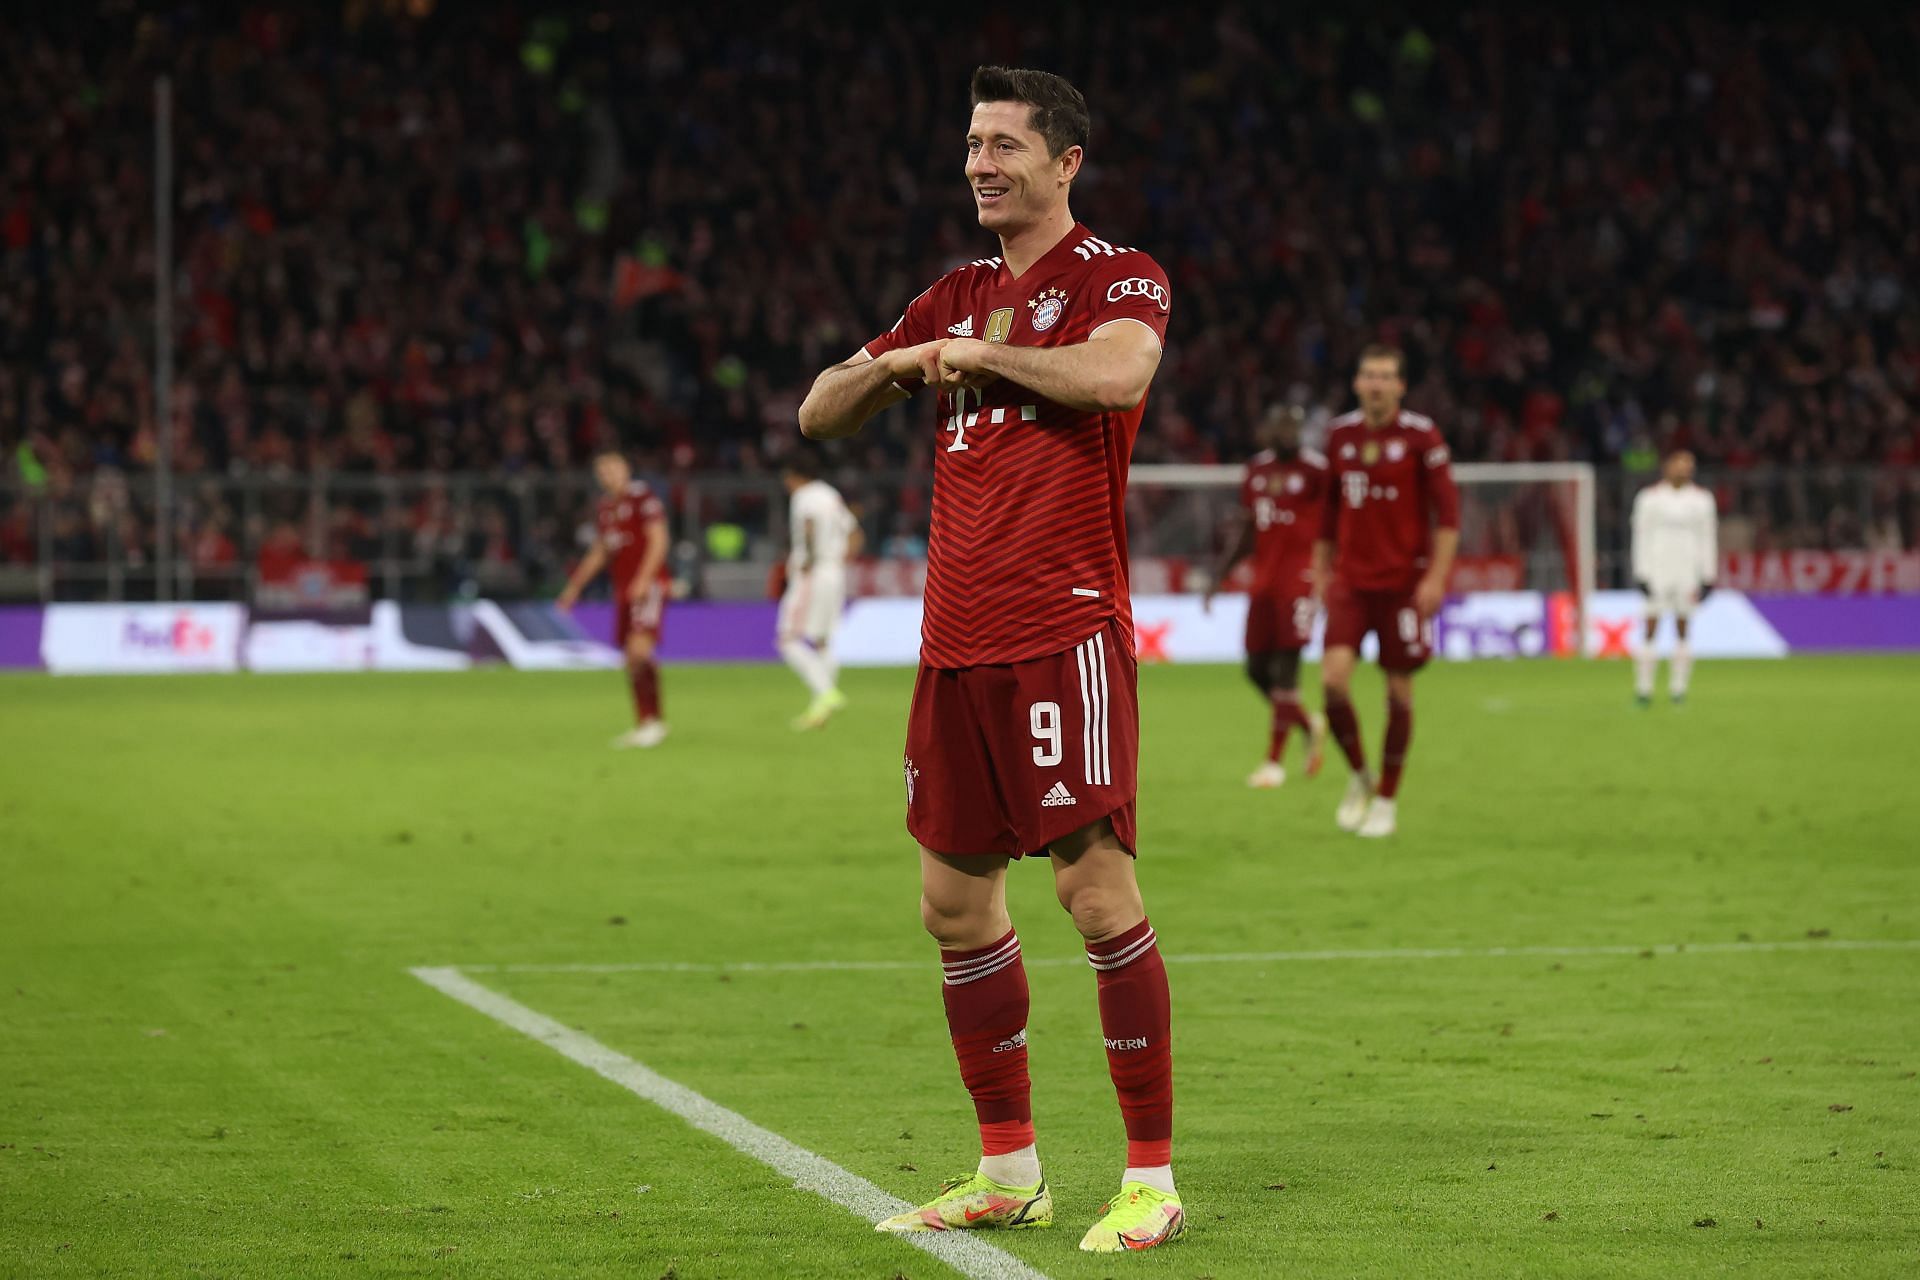 There is no stopping Lewandowski in his current form